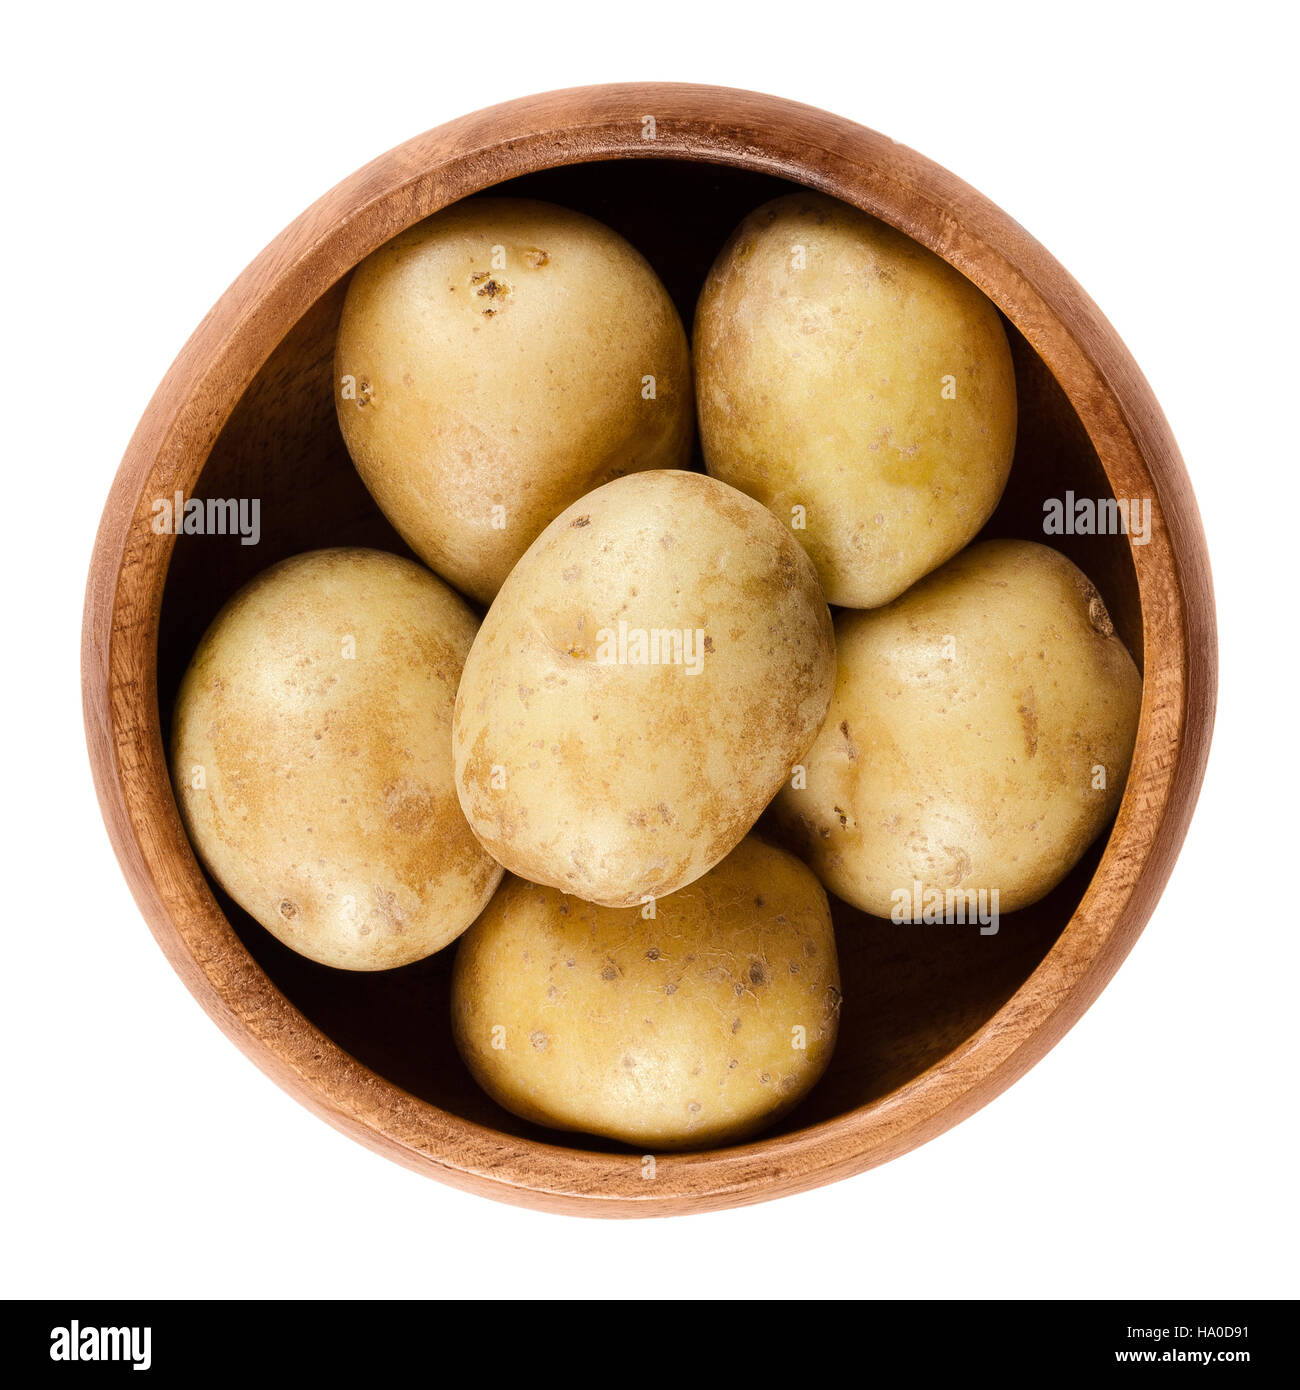 Raw mini potatoes in wooden bowl. Edible tuber of nightshade Solanum tuberosum, a starchy crop. Isolated macro food photo. Stock Photo